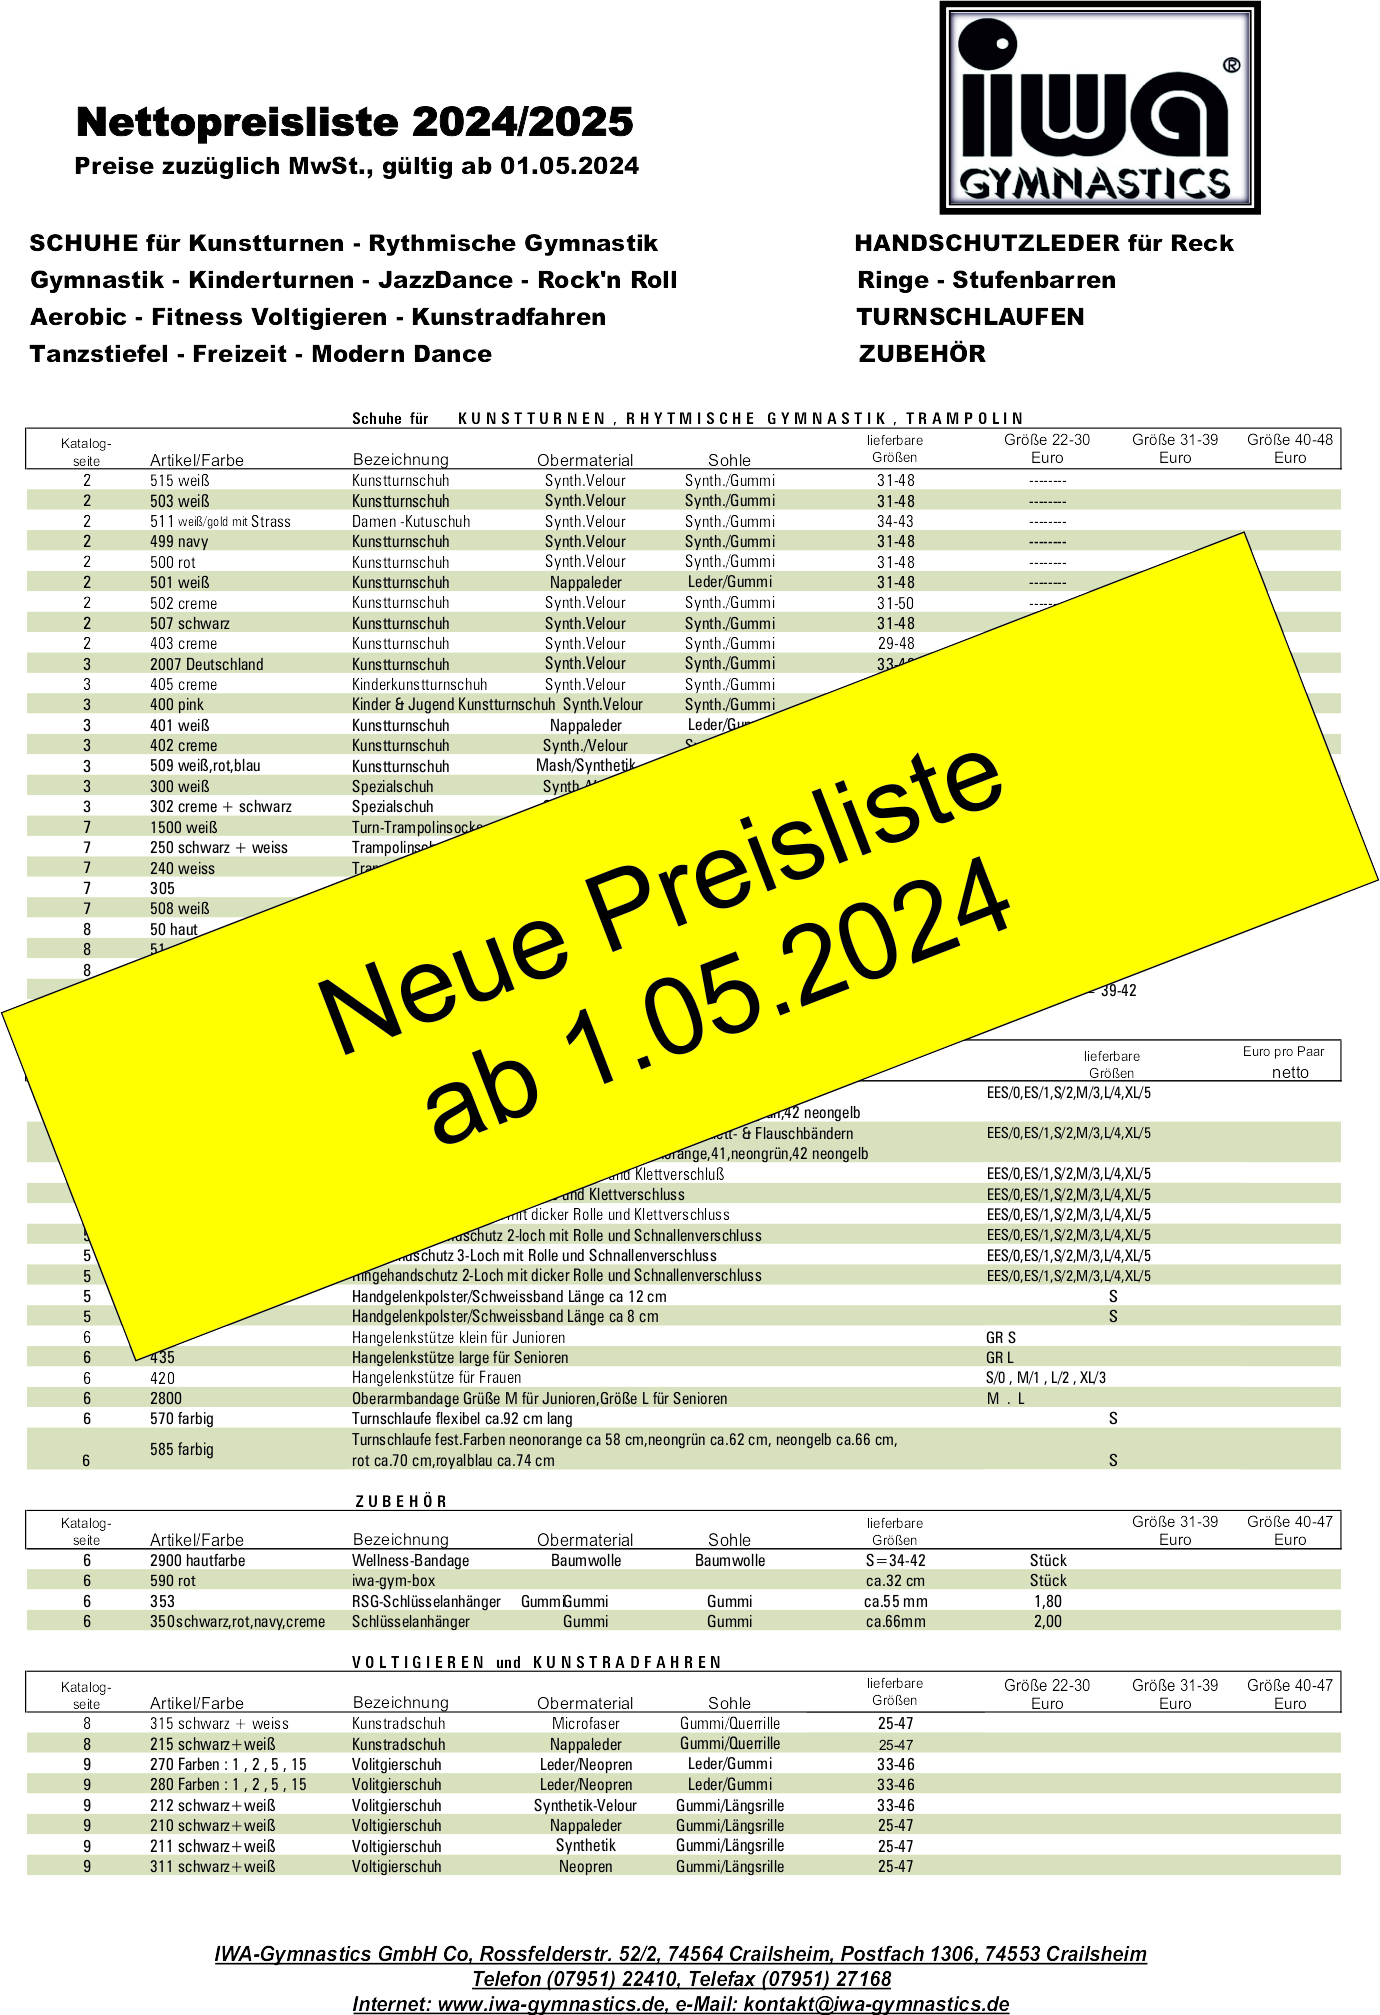 New price list is valid from 1.05.2024